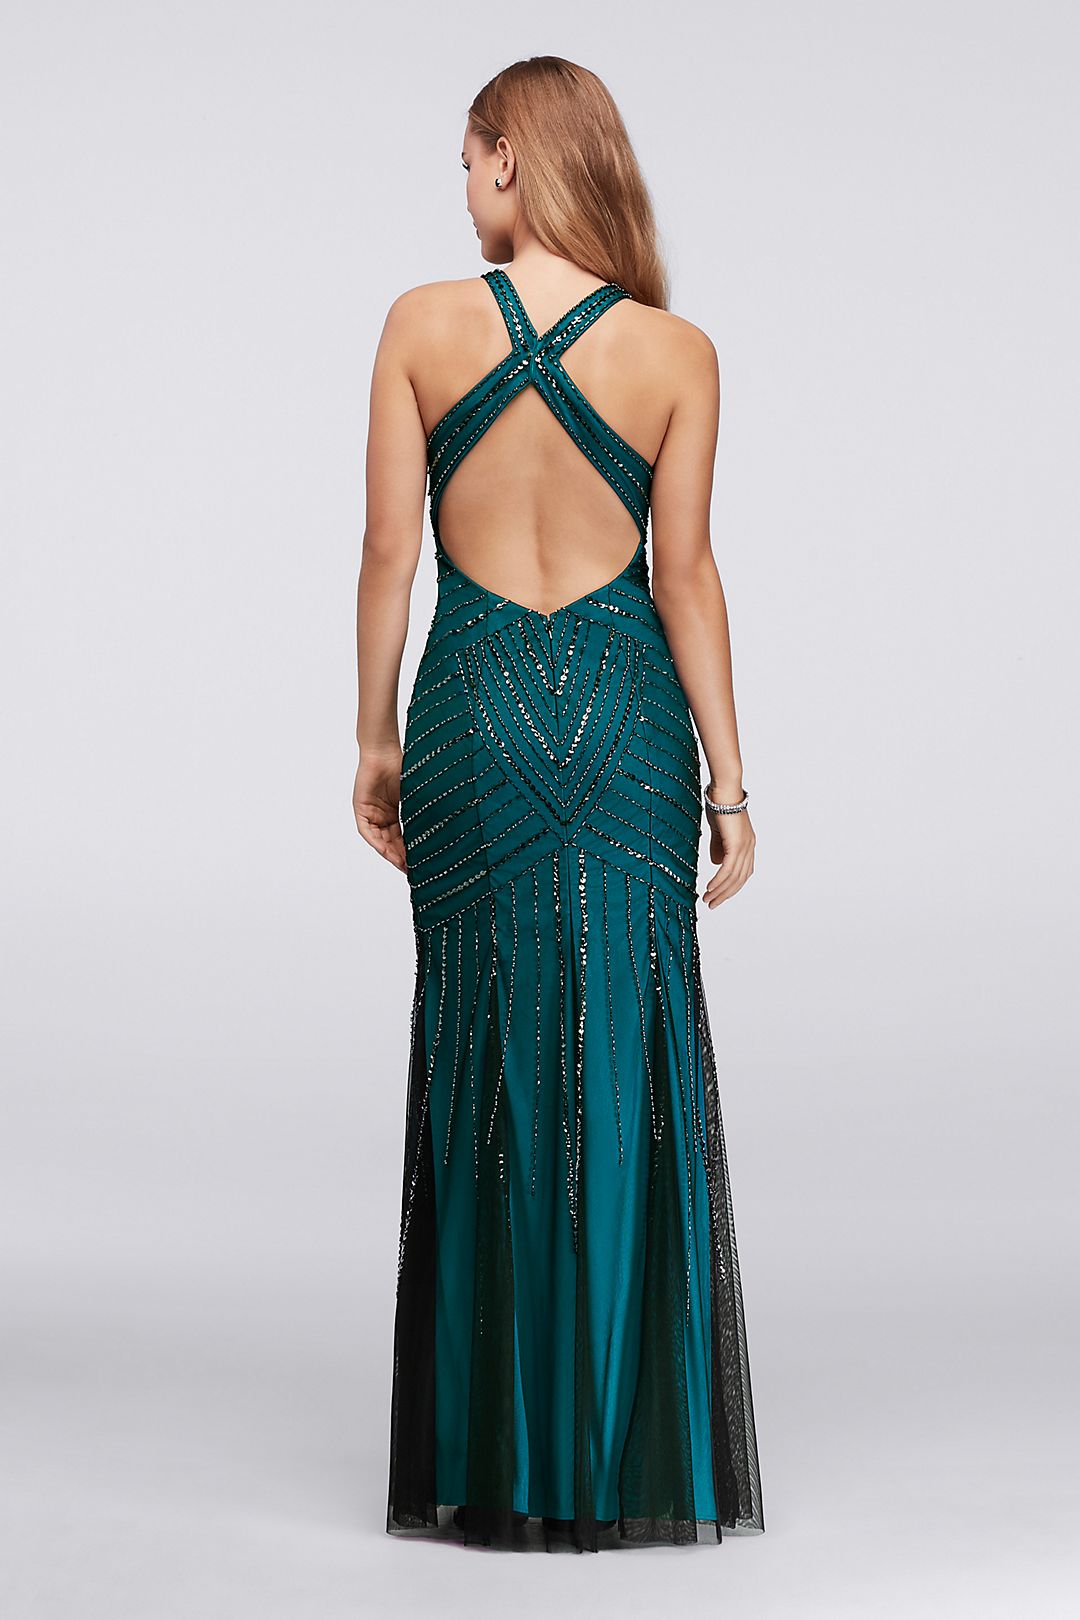 Illusion Sheath Gown with Allover Deco Beading Image 2